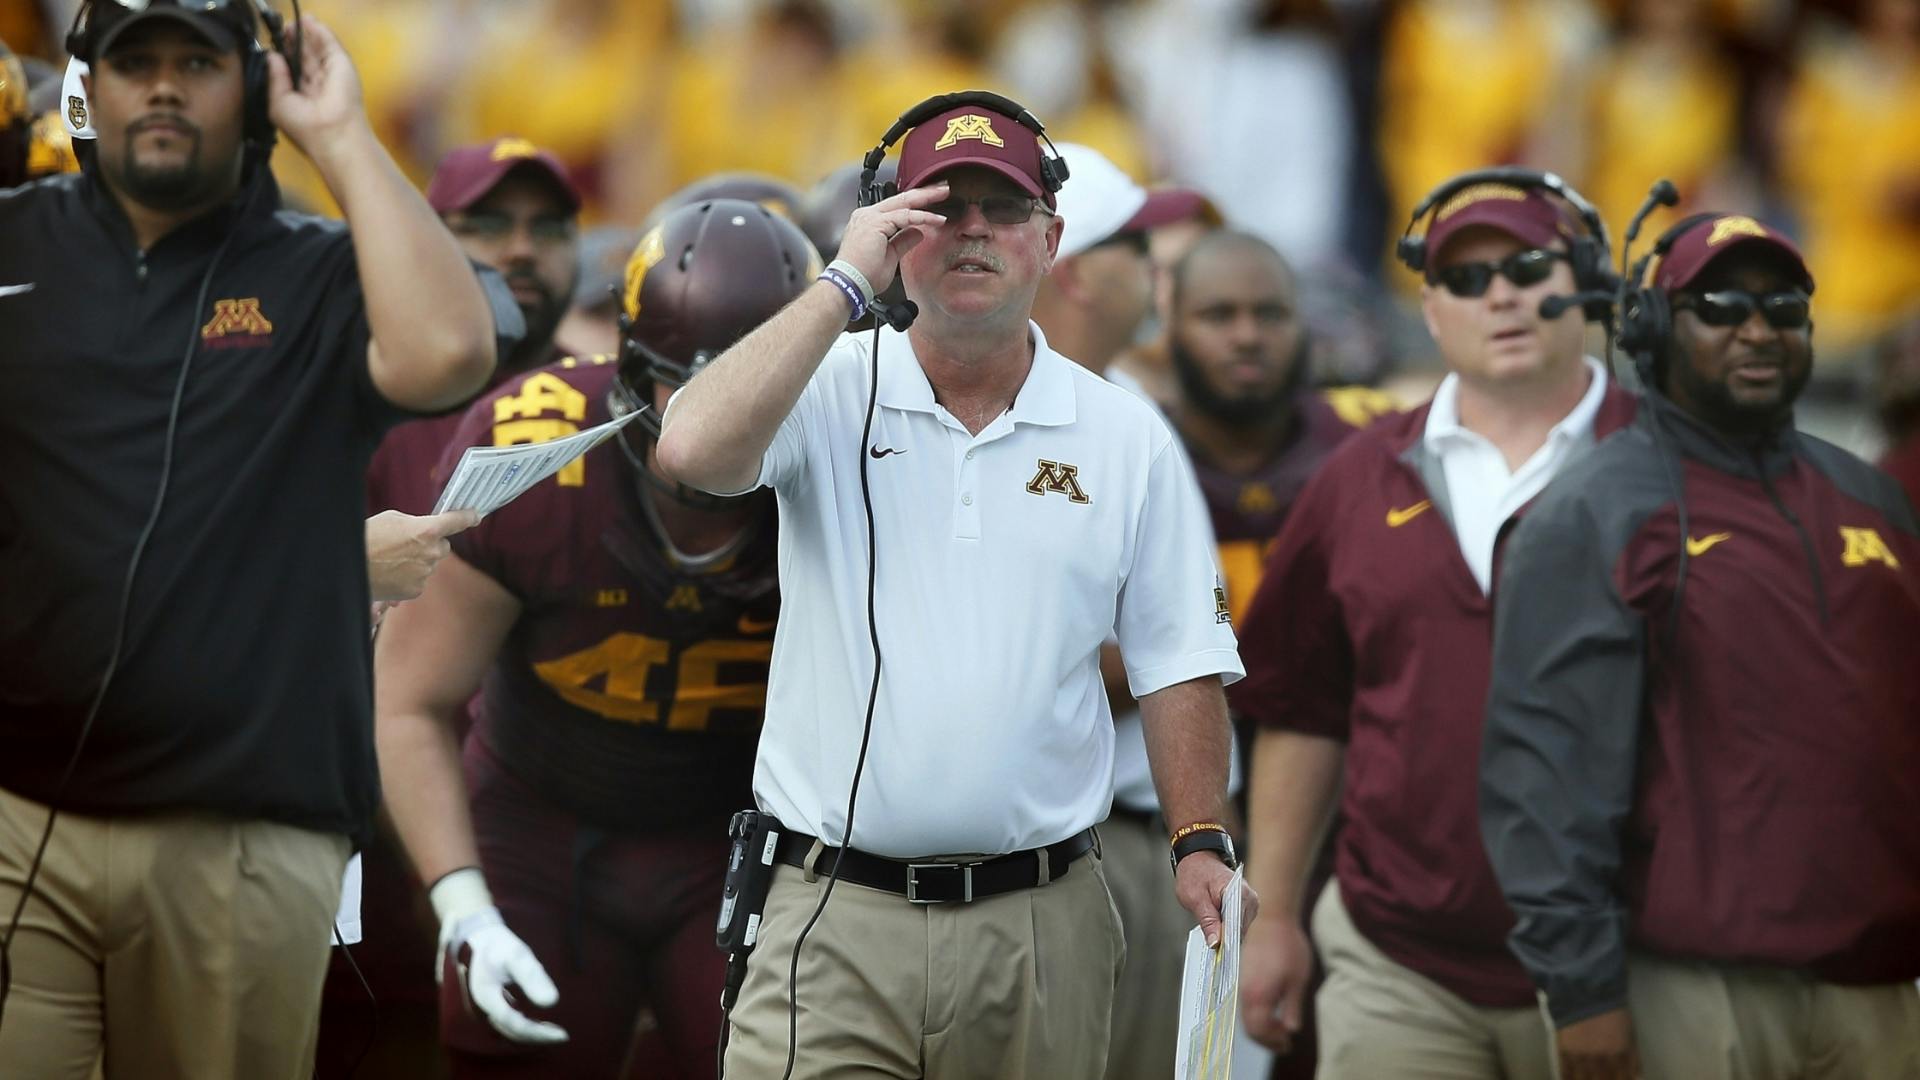 Gophers coach Jerry Kill addressed the media after Thursday's spring football practice and talked about the new no huddle offense.